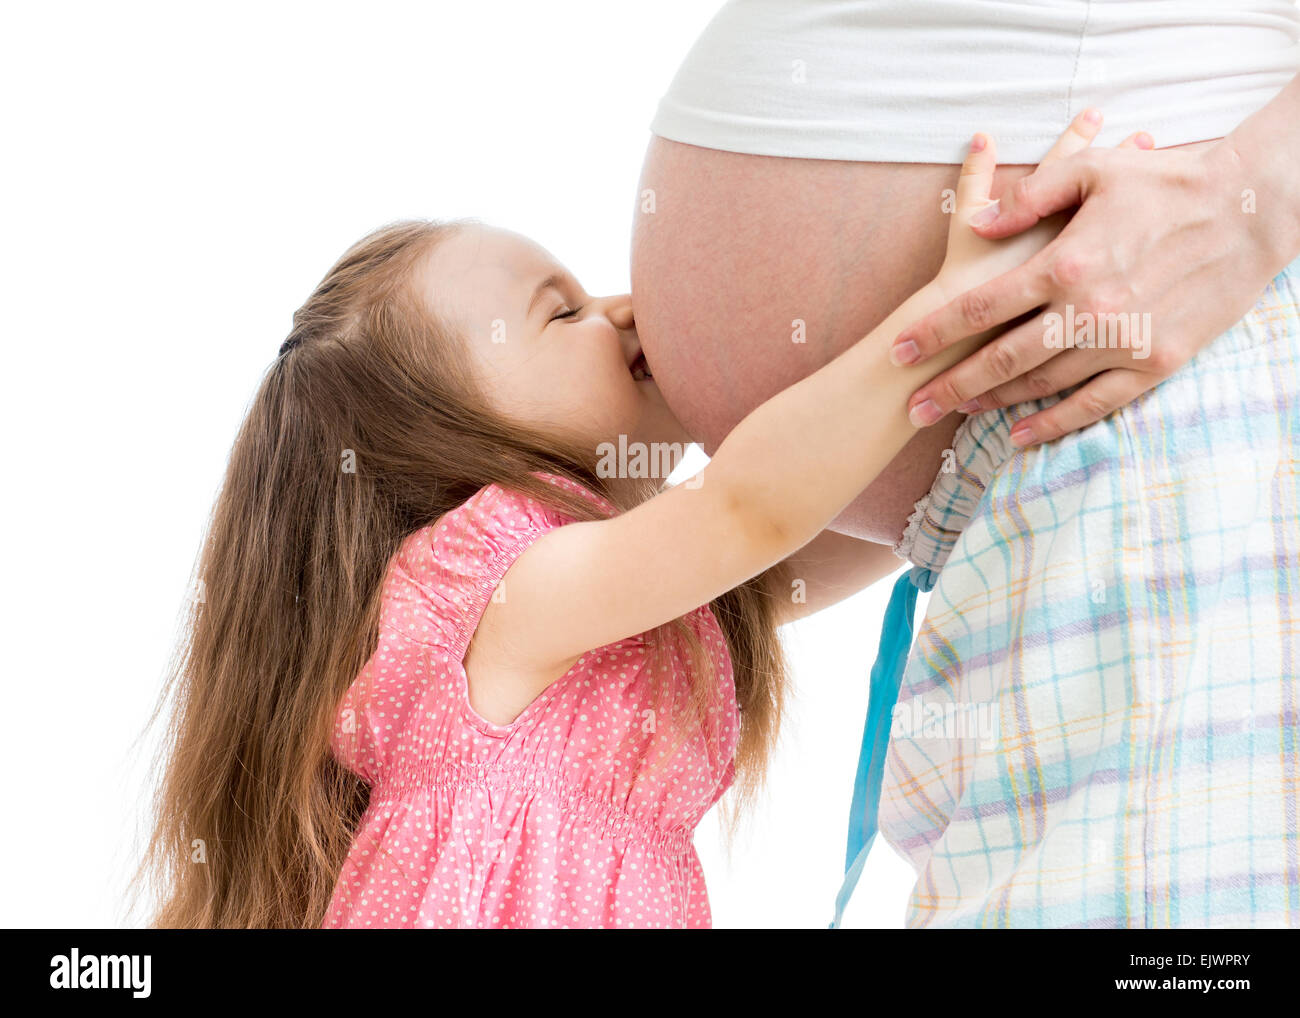 child girl kissing pregnant mother stomach Stock Photo